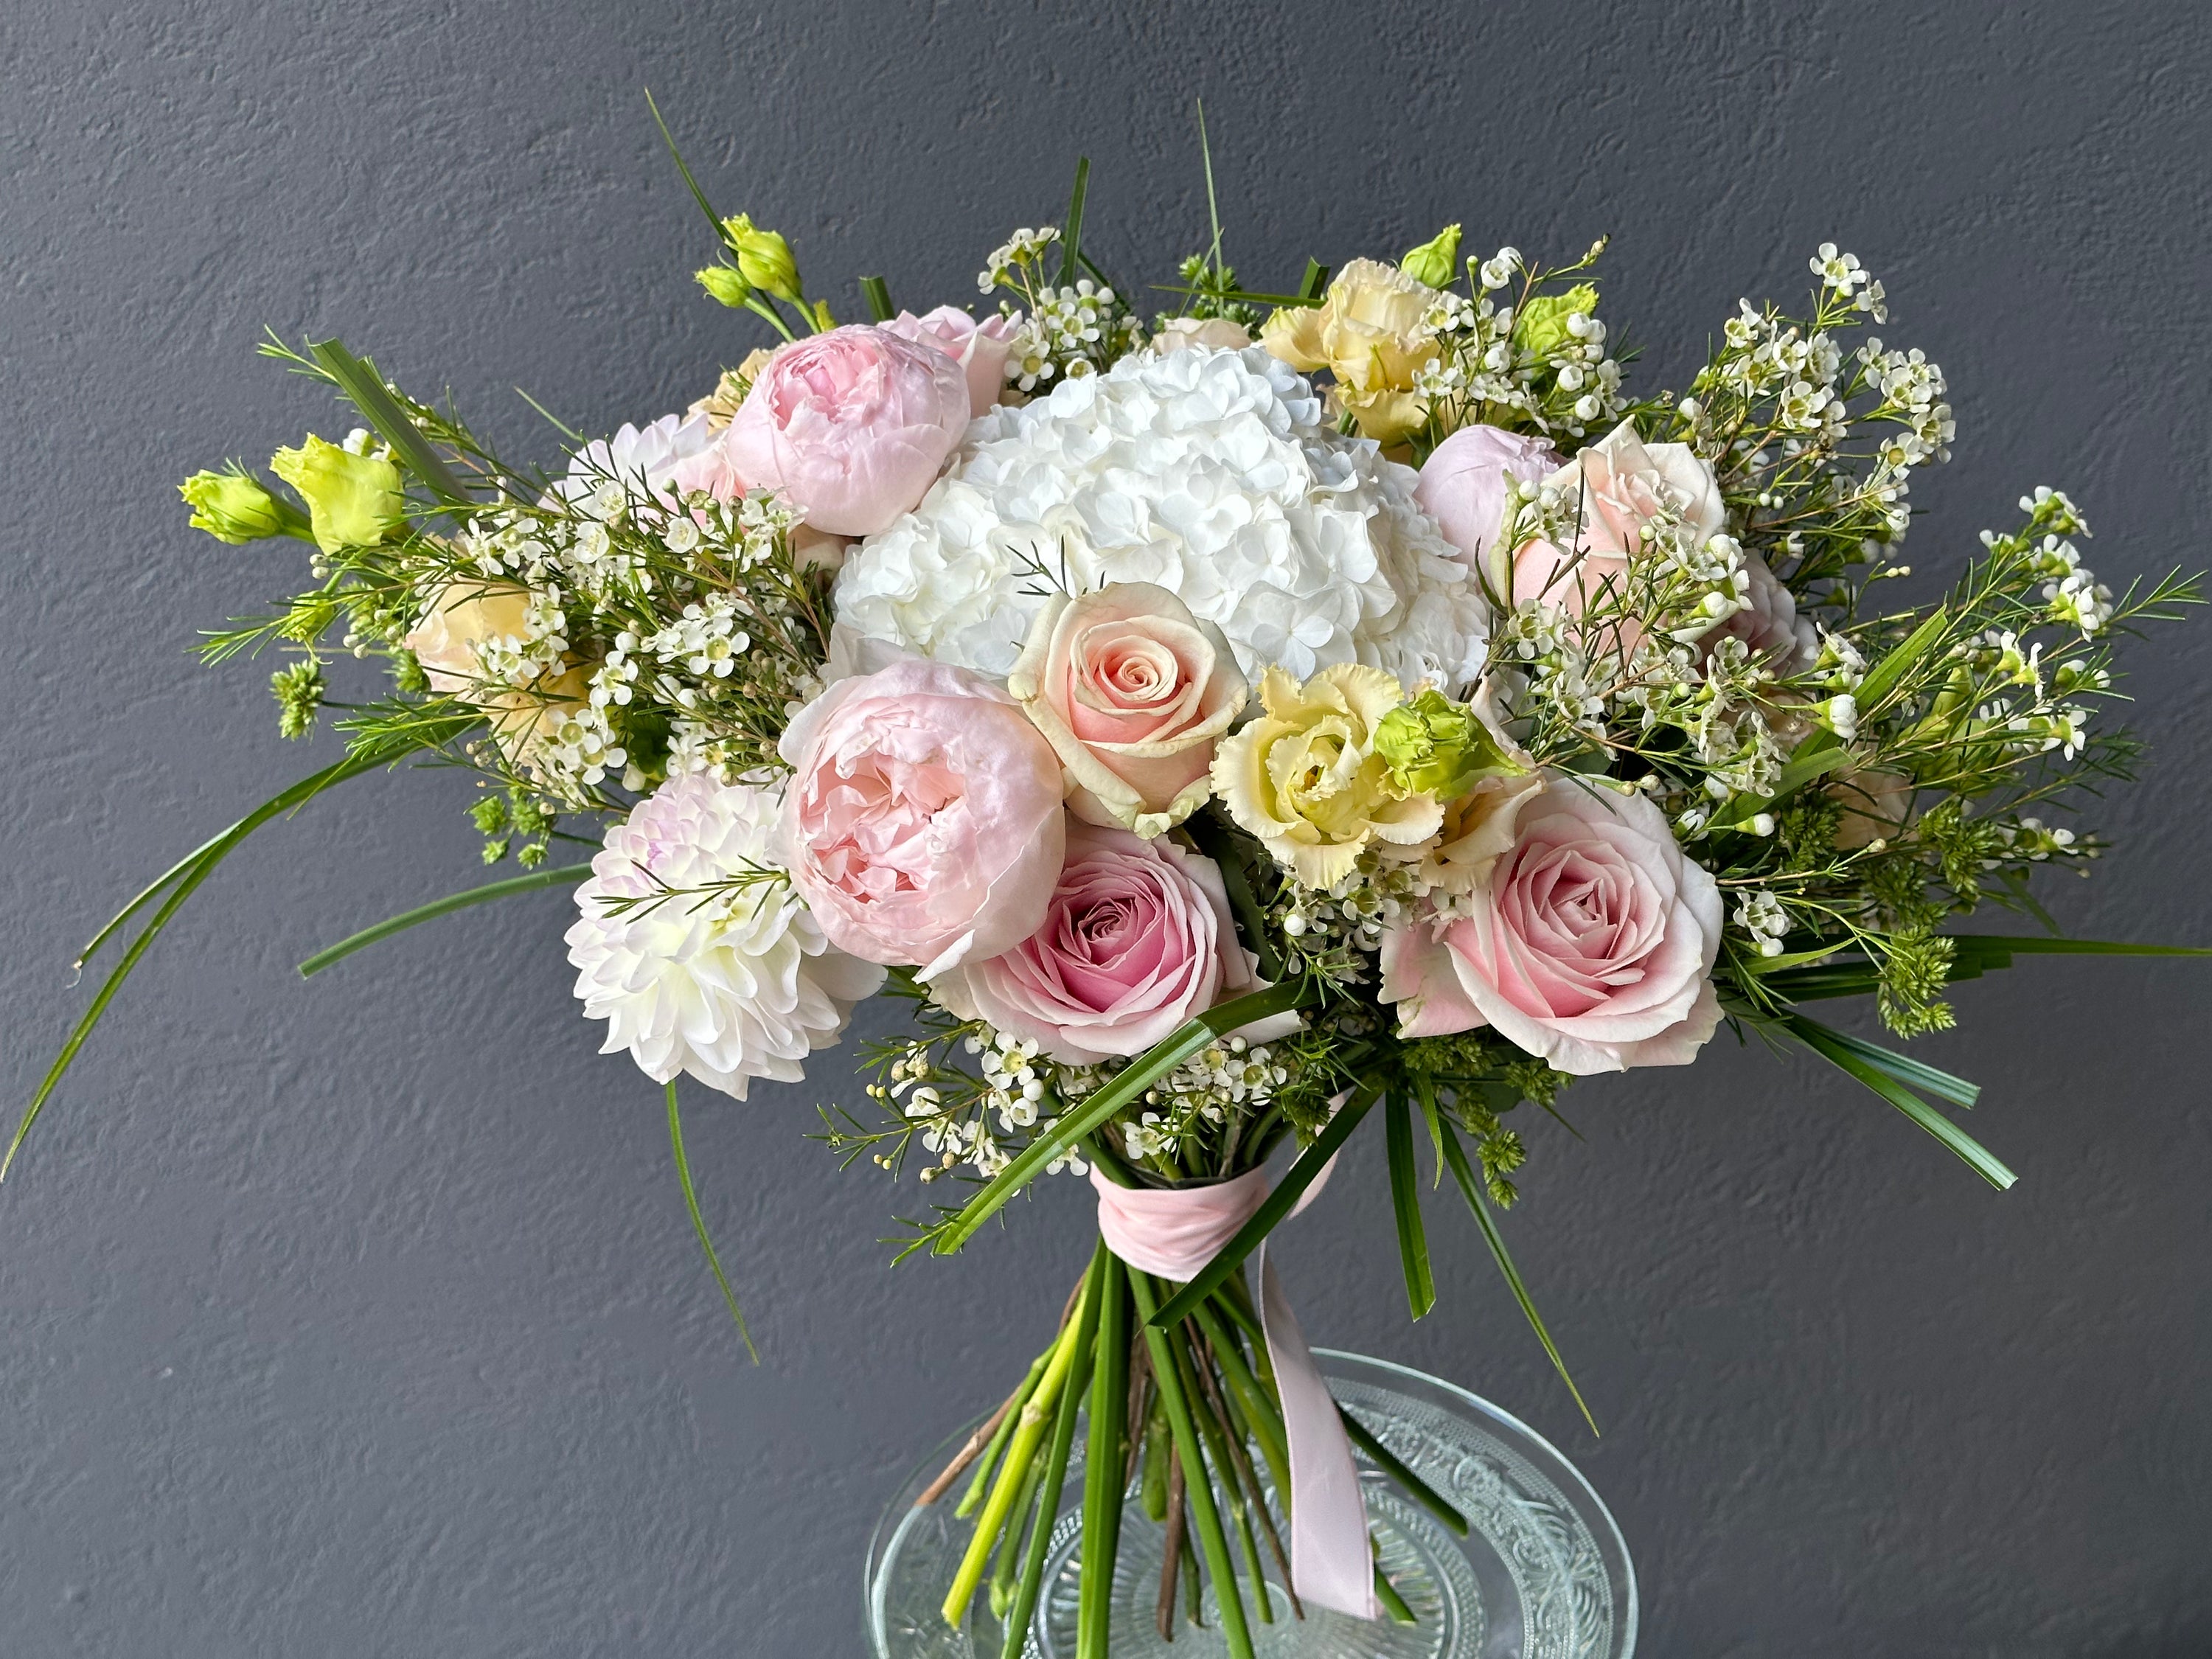 Bouquet in light floral shades